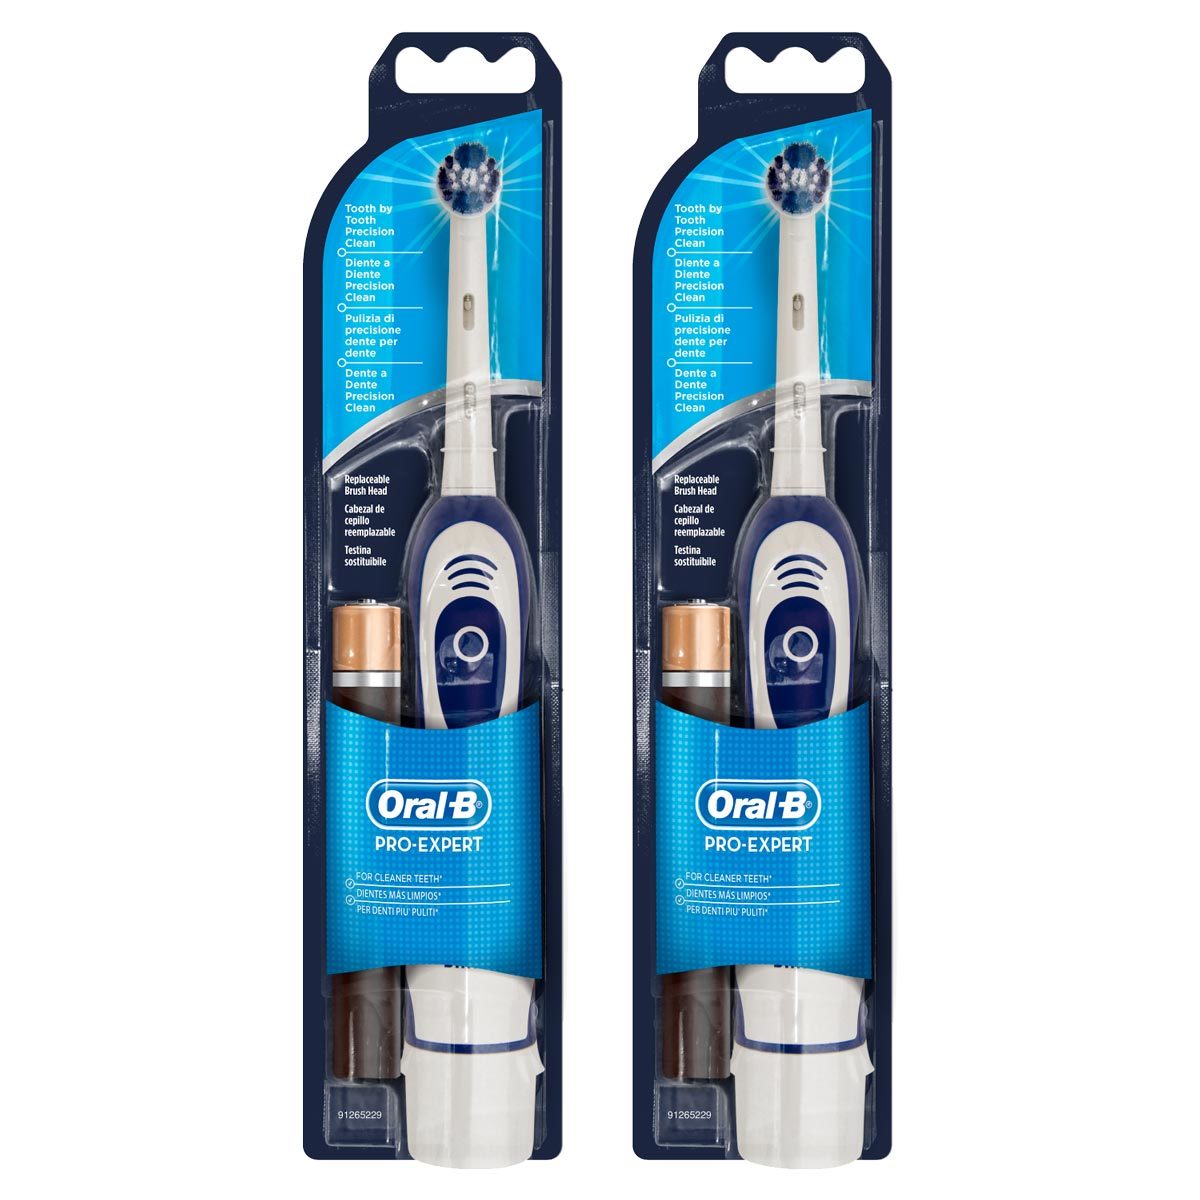 Oral-B Pro Expert 400 Battery Toothbrush, 2 Pack